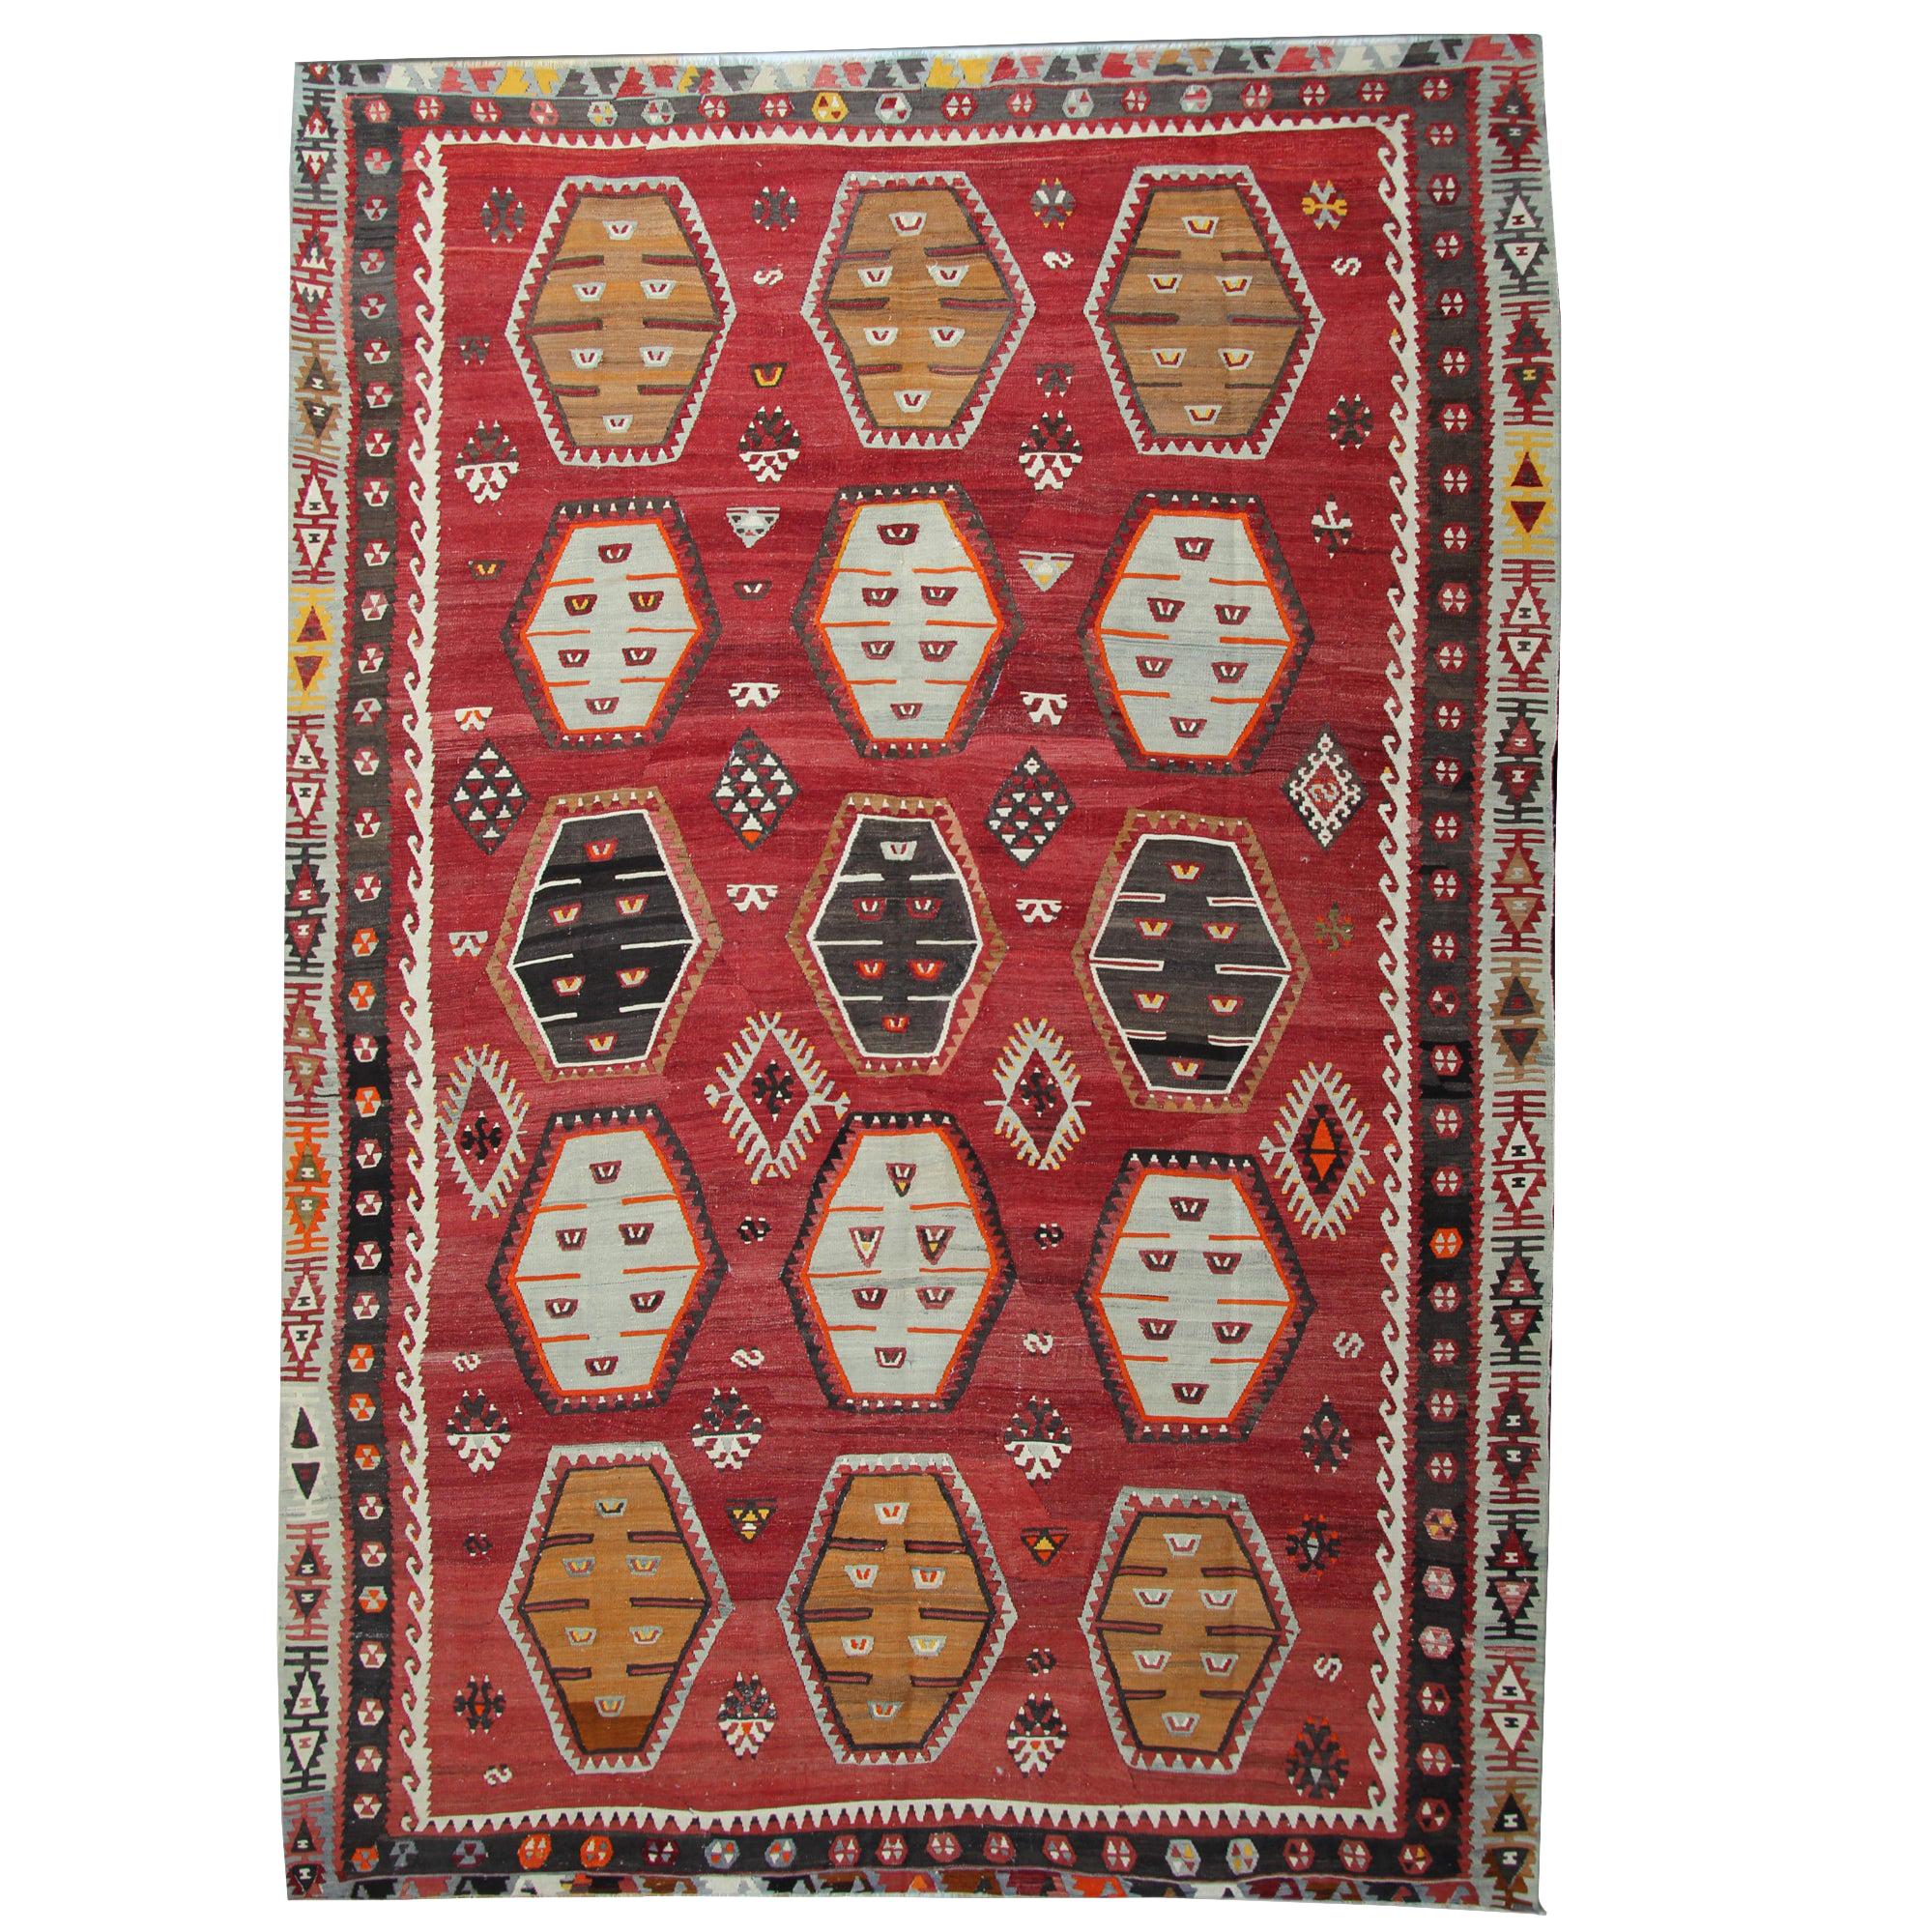 Antique Rugs, Red Kilim Rugs Sarkisla Carpet Turkish Rugs for Sale For Sale